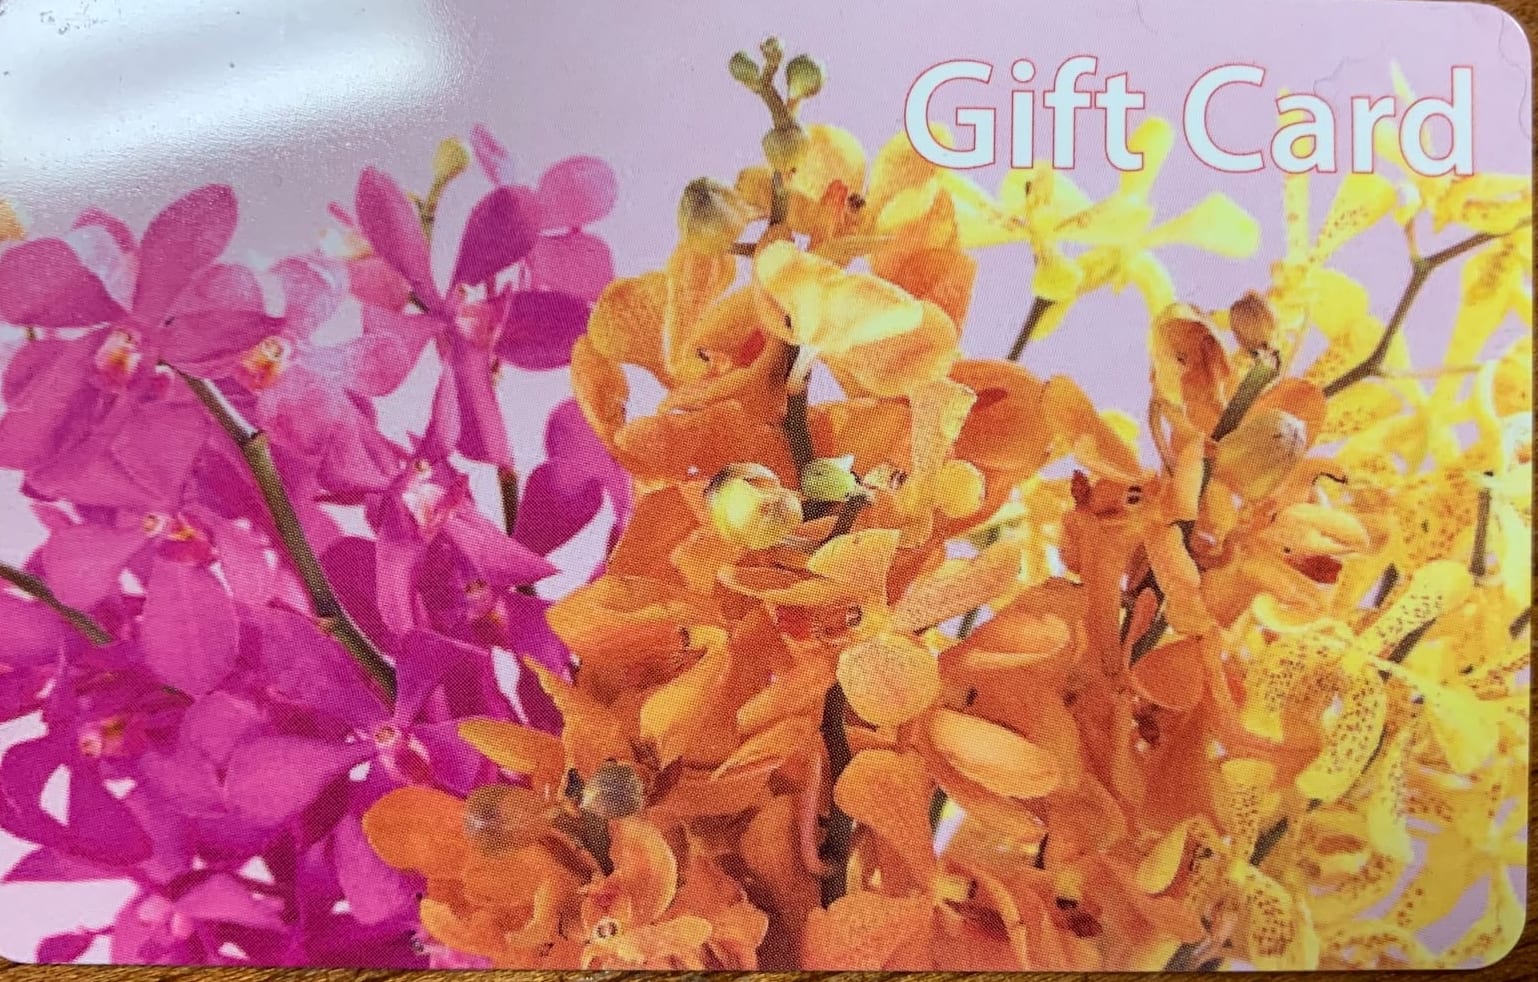 $200 Gift Card - Introducing the Exceptional Flowers &amp; Gifts $200 Gift Card, the perfect gift for anyone who appreciates the finest in floral arrangements, artisan chocolates, balloons, teddy bears, or handmade soaps. This versatile gift card can be used for pick-up or delivery of exceptional products within our local area, including Boca Raton, Delray Beach, Deerfield Beach, Boynton Beach, and Highland Beach.  With the Exceptional Flowers &amp; Gifts $200 Gift Card, your recipient will have the opportunity to indulge in the beauty and fragrance of our exquisite flower arrangements. Our skilled florists create stunning arrangements using the highest quality blooms, ensuring that each bouquet is a work of art that brings joy and delight to its recipient. From classic roses to vibrant mixed arrangements, there is something for every taste and occasion.  For those with a sweet tooth, our artisan chocolates are a true delight. Made with the finest ingredients and crafted with exceptional skill, these chocolates offer a decadent experience and will delight the senses. Whether it's a box of assorted chocolates, chocolate-covered strawberries, or a custom-made chocolate creation, our selection is sure to satisfy even the most discerning chocolate lover.  Balloons add a touch of fun and celebration to any occasion, and our collection of balloons is sure to bring a smile to anyone's face. From cheerful and colorful designs to elegant and glamorous options, there is a balloon for every celebration. Let your loved one bask in the joy and excitement that balloons bring with our diverse selection.  Our collection of soft and cuddly teddy bears is perfect for those who appreciate a heartfelt and adorable gift. Whether for a child or a loved one, these plush companions are sure to bring comfort and warmth. From classic bears to whimsical characters, each teddy bear is made with the utmost care and attention to detail.  Handmade soaps provide a luxurious and pampering experience. Our selection of artisan soaps is crafted with natural ingredients, nourishing the skin and leaving it feeling soft and supple. The enticing scents and beautiful designs make these soaps a treat for the senses, creating a spa-like experience in the comfort of one's own home.  With the Exceptional Flowers &amp; Gifts $200 Gift Card, you can be confident that your recipient will be able to choose the perfect gift to suit their preferences. Whether they opt for a stunning floral arrangement, delectable chocolates, festive balloons, adorable teddy bears, or indulgent handmade soaps, their gift will be a reflection of your thoughtfulness and generosity.  Present your loved one with the Exceptional Flowers &amp; Gifts $200 Gift Card and let them discover the joy of choosing their own exceptional gift. Whether for a special occasion or just to brighten someone's day, this gift card is the gateway to a world of beauty, joy, and heartfelt surprises.